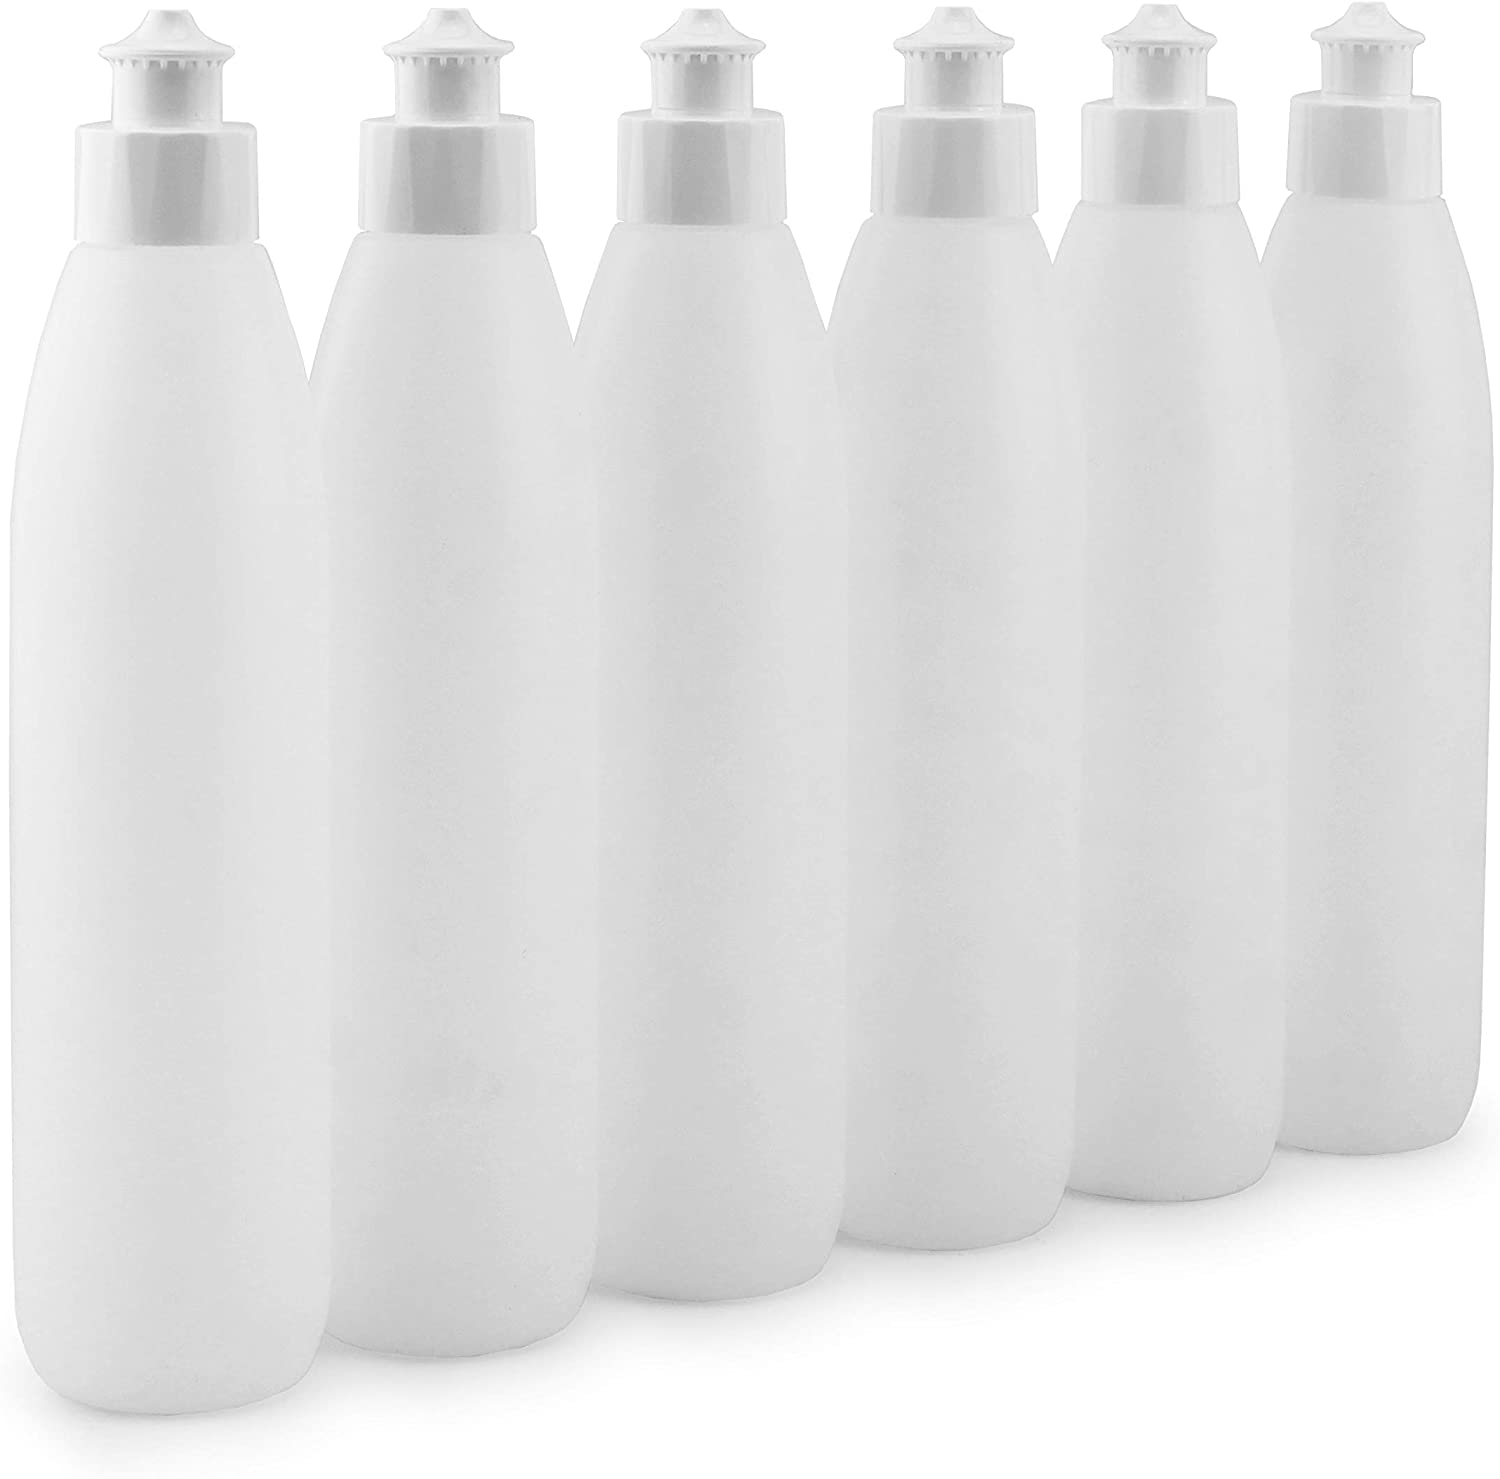 8oz Squeeze Bottles for Dish Soap and Sauces (6-Pack) - sh1783cb0aep